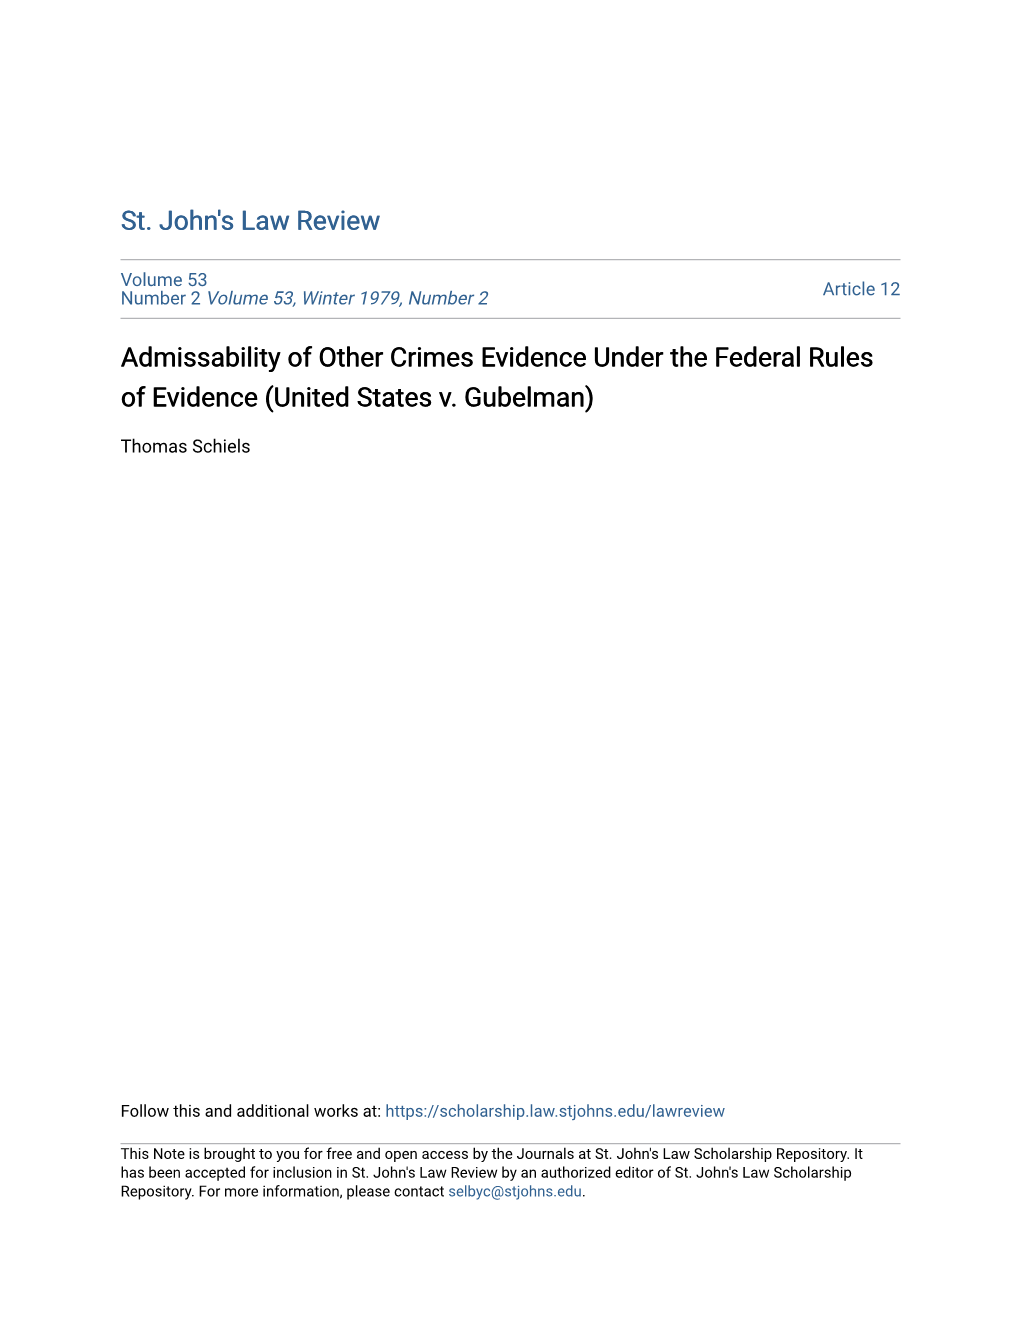 Admissability of Other Crimes Evidence Under the Federal Rules of Evidence (United States V